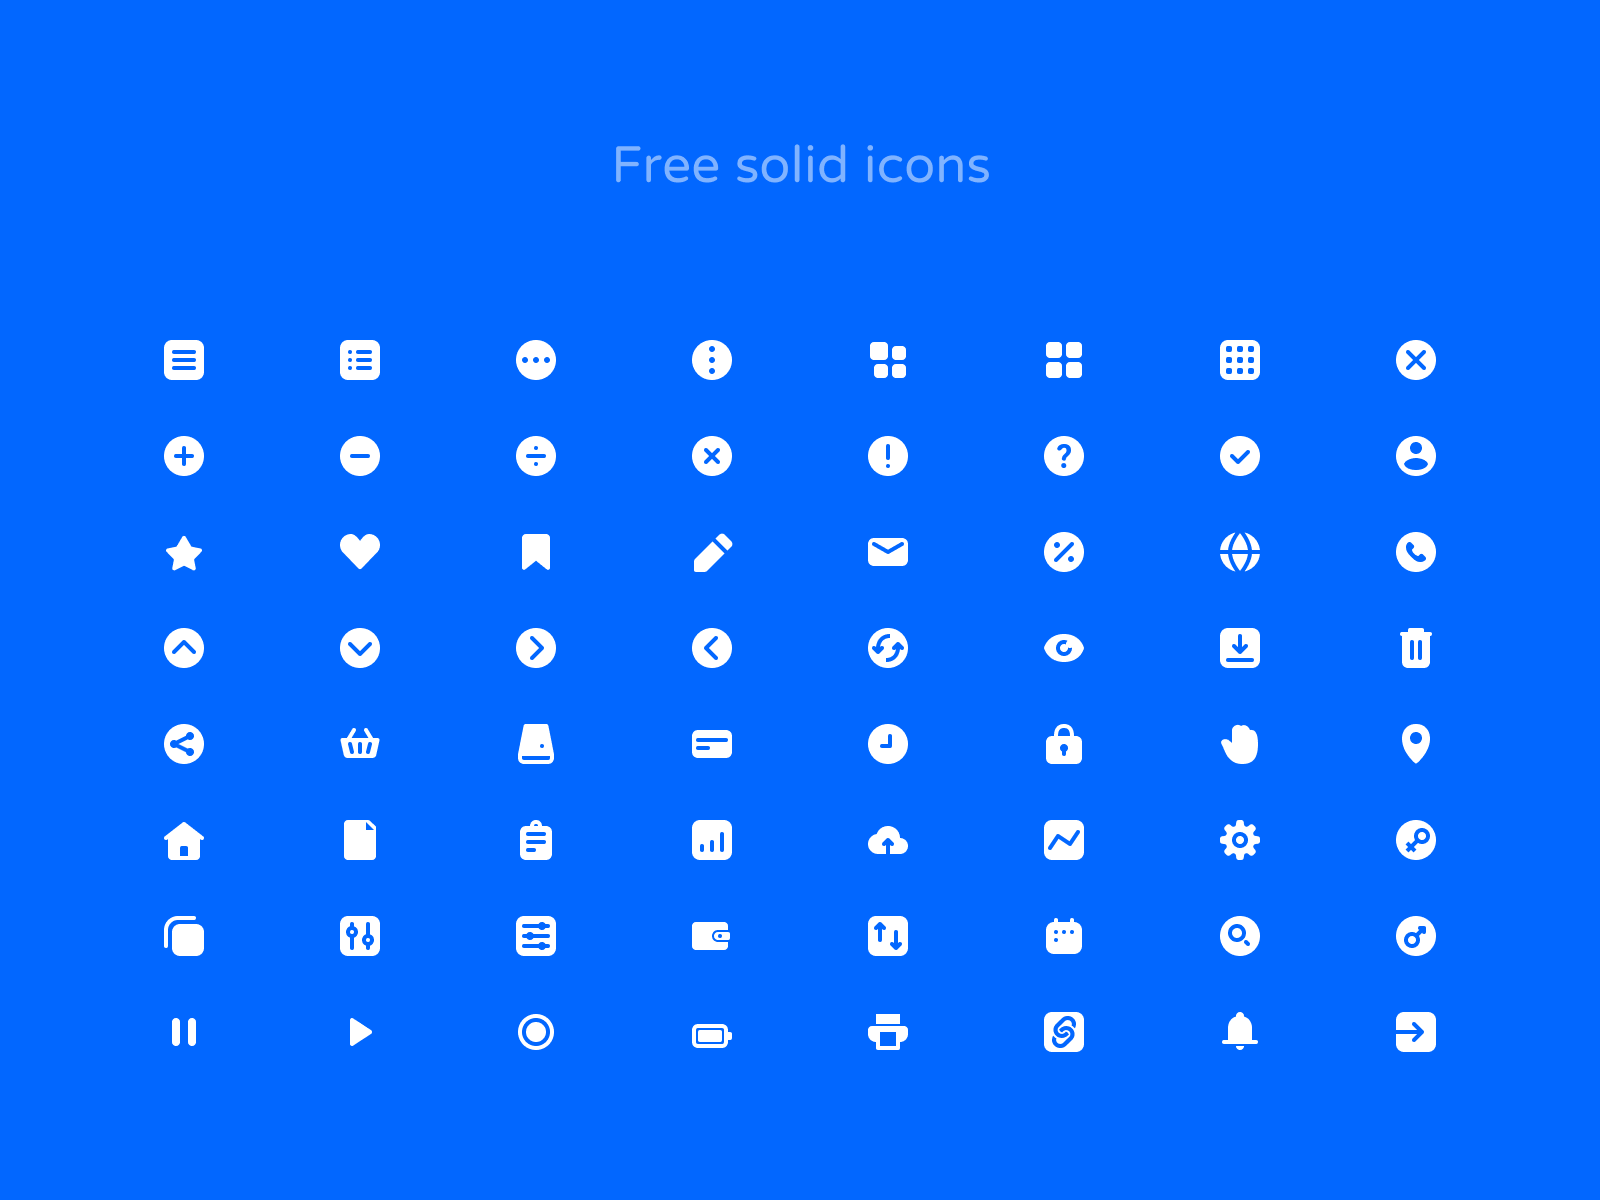 Free popular solid icons figma figmadesign free freebie icons icons design iconsdesign iconset solid